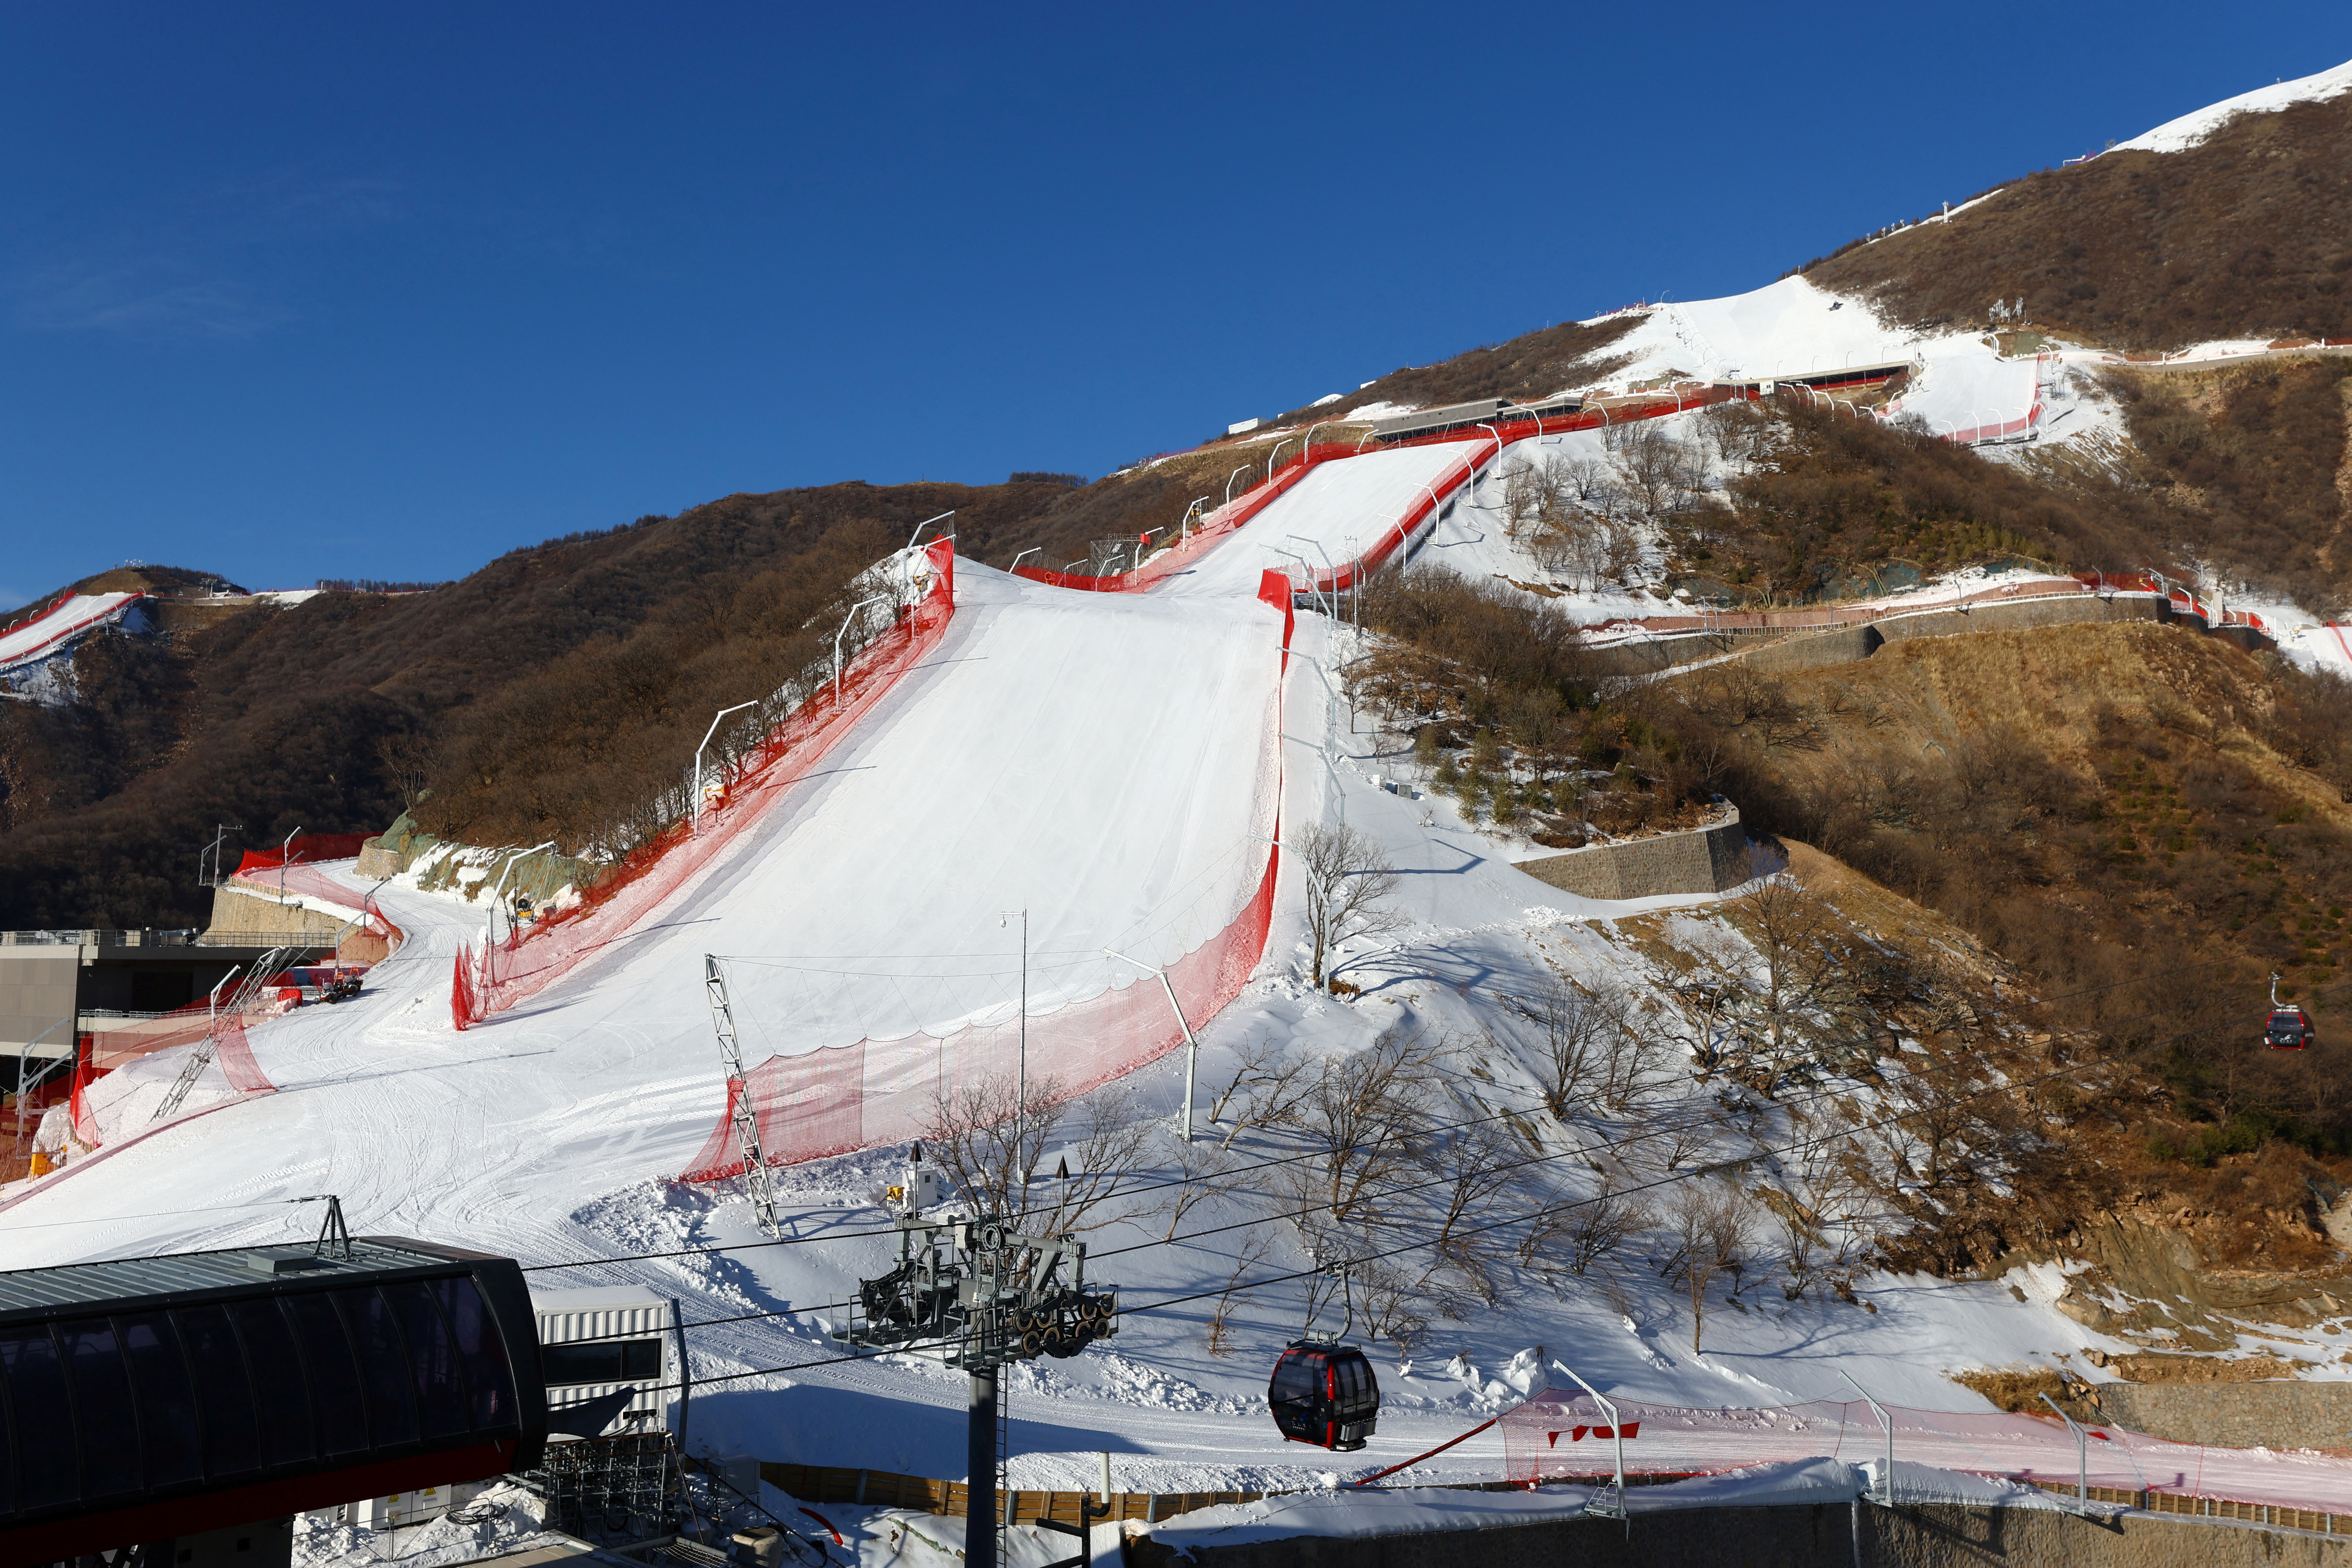 Yanqing Alpine Skiing Centre, a competition venue for Alpine Skiing during the Beijing 2022 Winter Olympics, is seen in Beijing, China January 14, 2022. REUTERS/Pawel Kopczynski